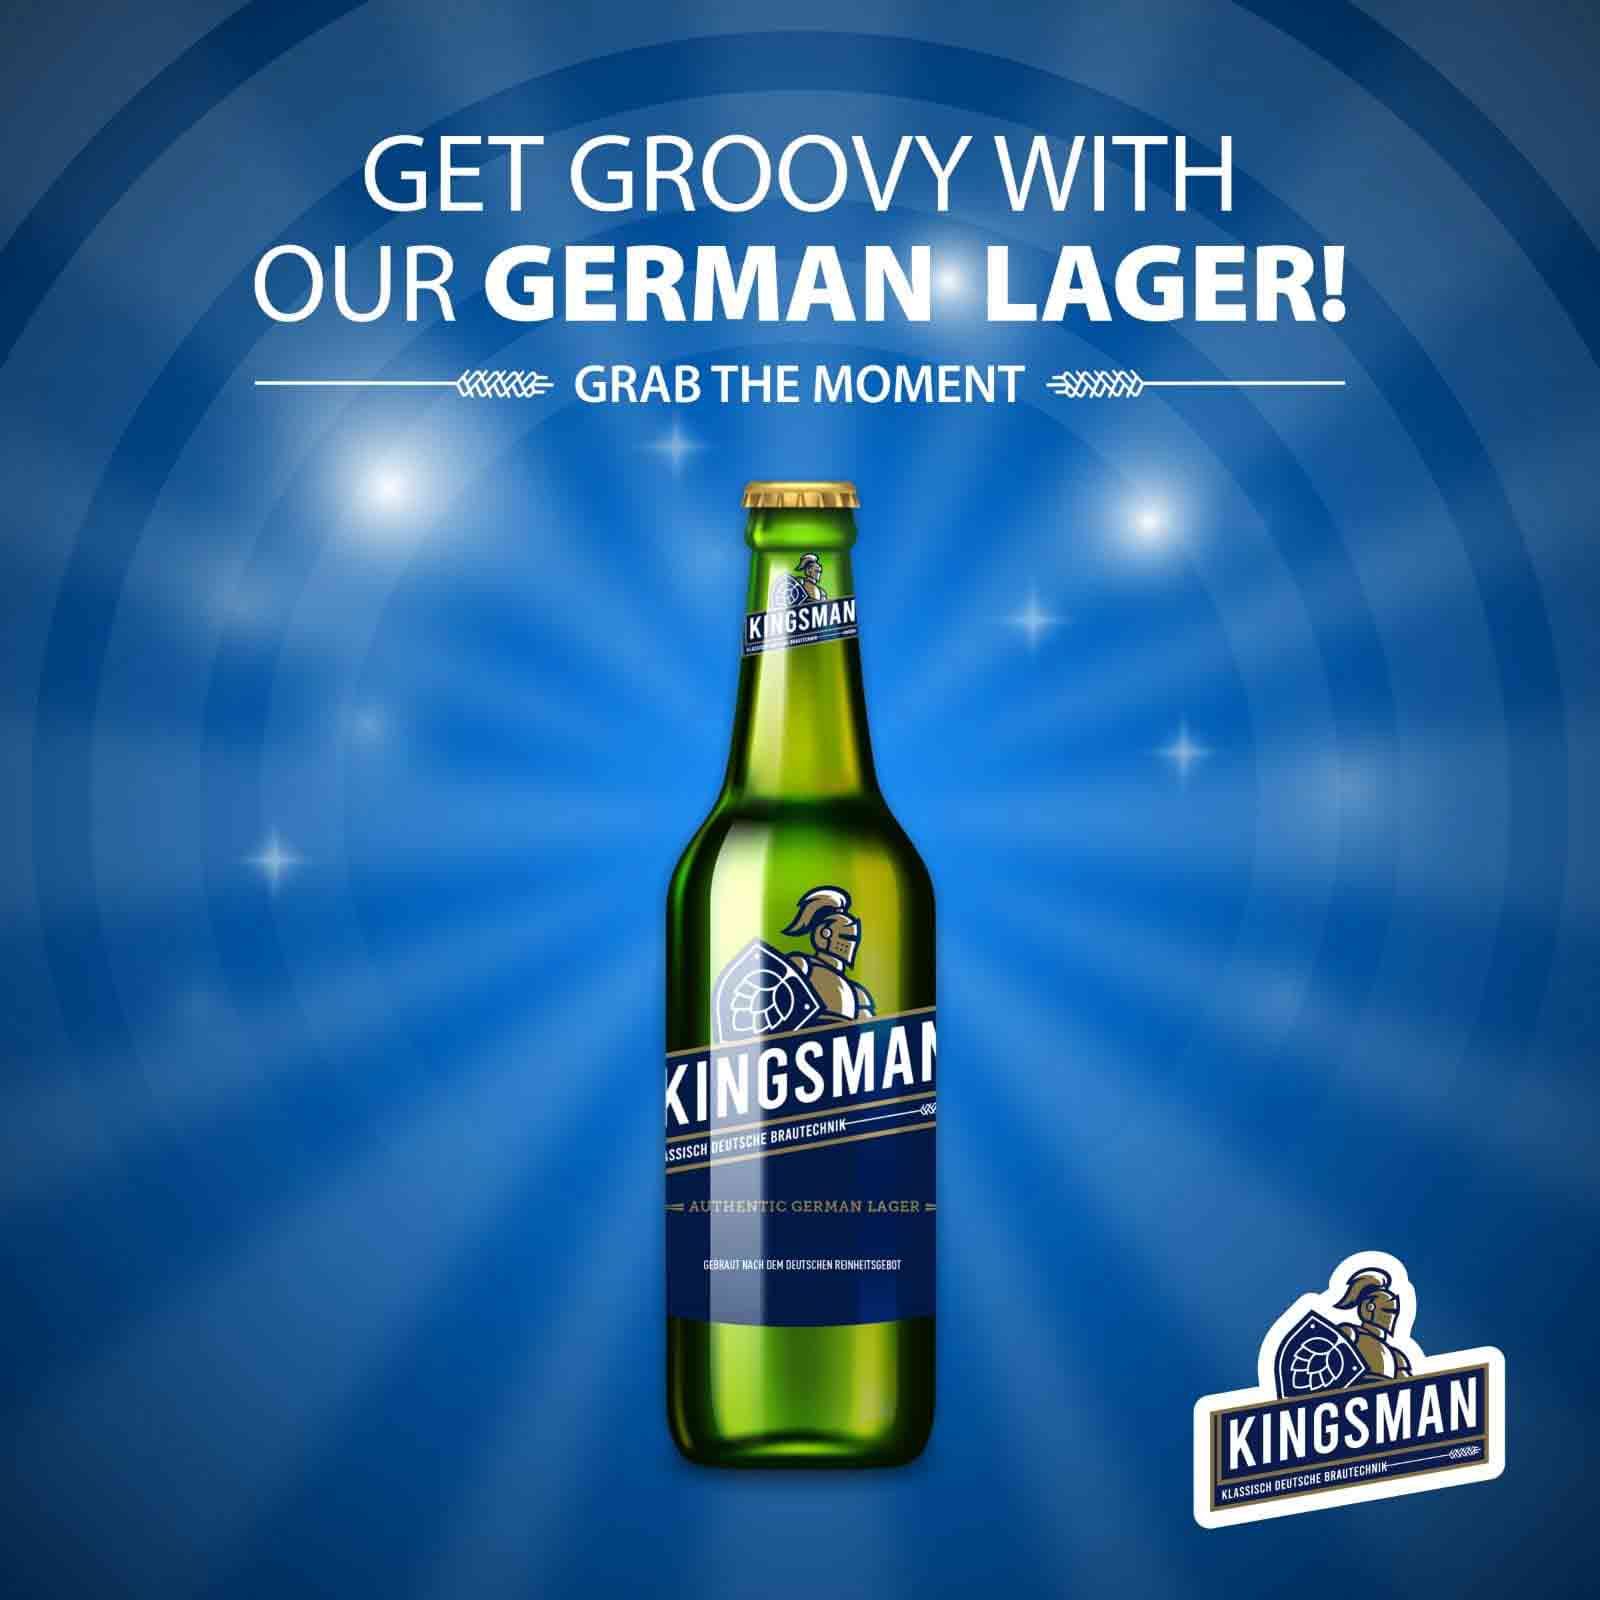 Get Groovy With Kingsman German Lager